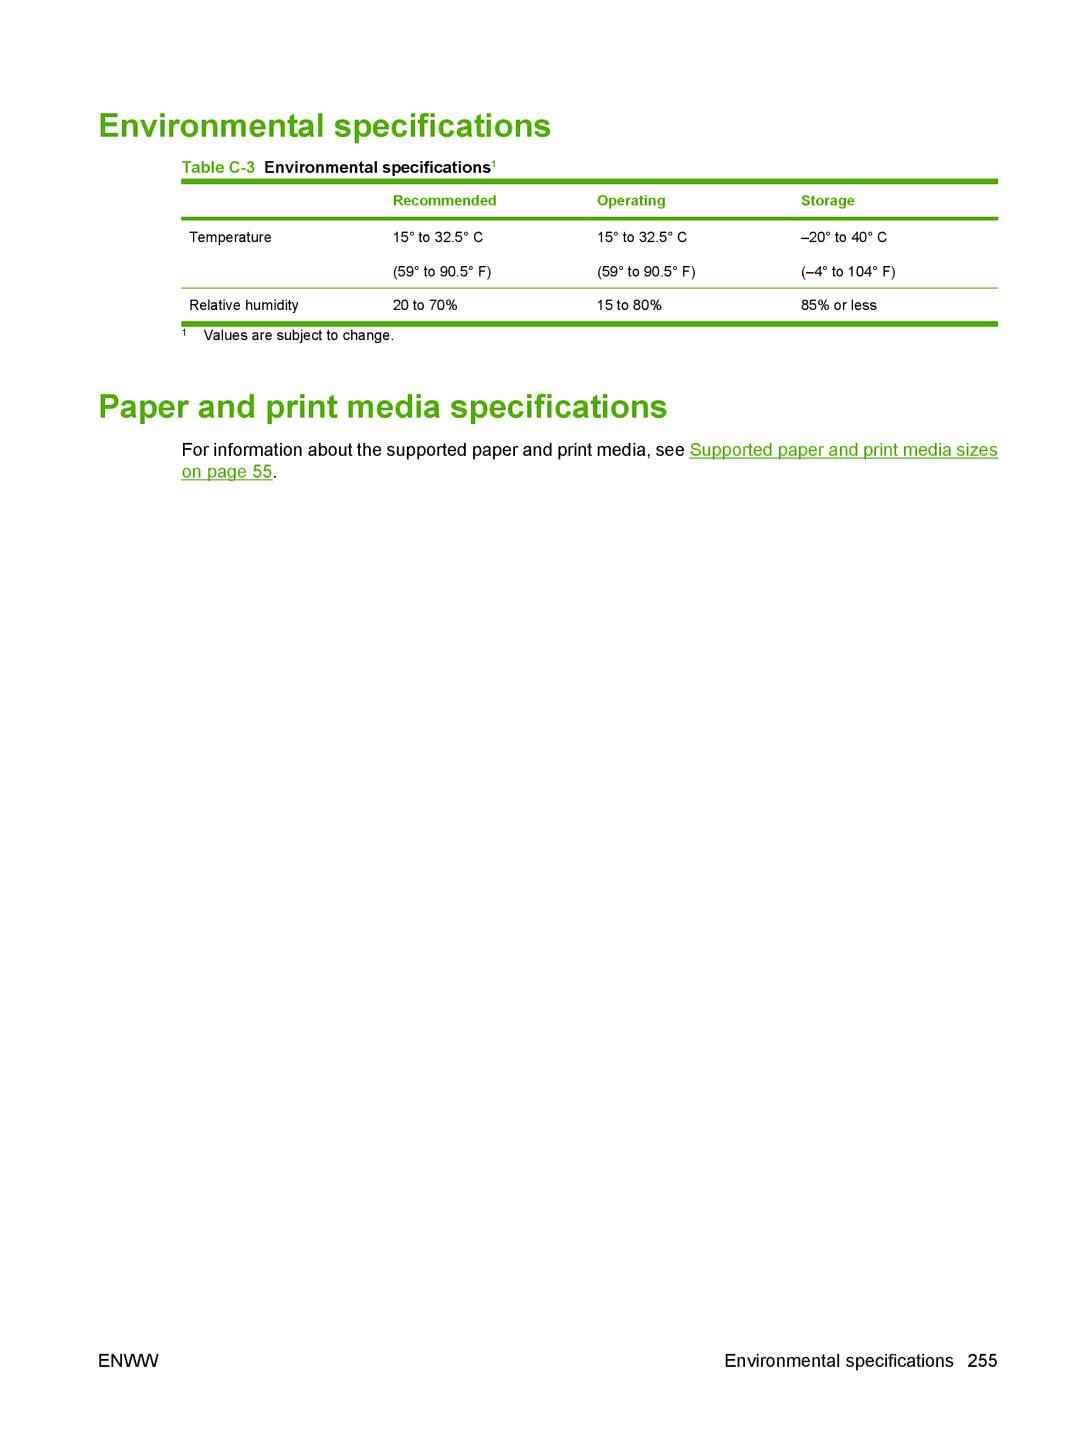 HP CM2320 Paper and print media specifications, Table C-3Environmental specifications1, Recommended Operating Storage 